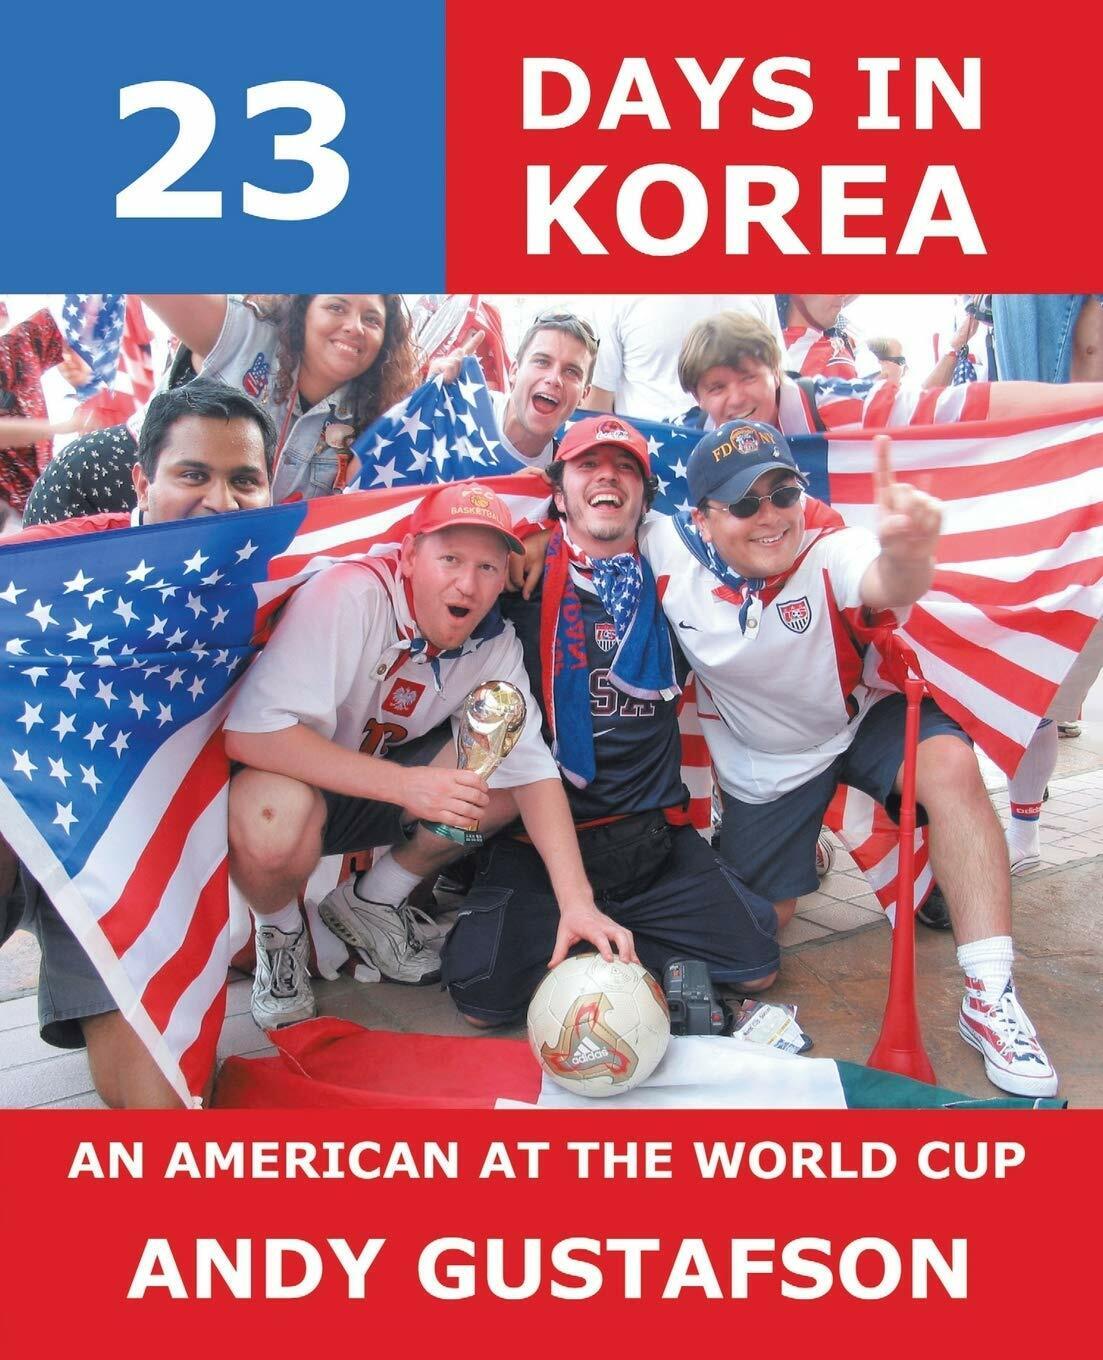 23 Days in Korea: An American at the World Cup - Andy Gustafson - Trafford, 2003